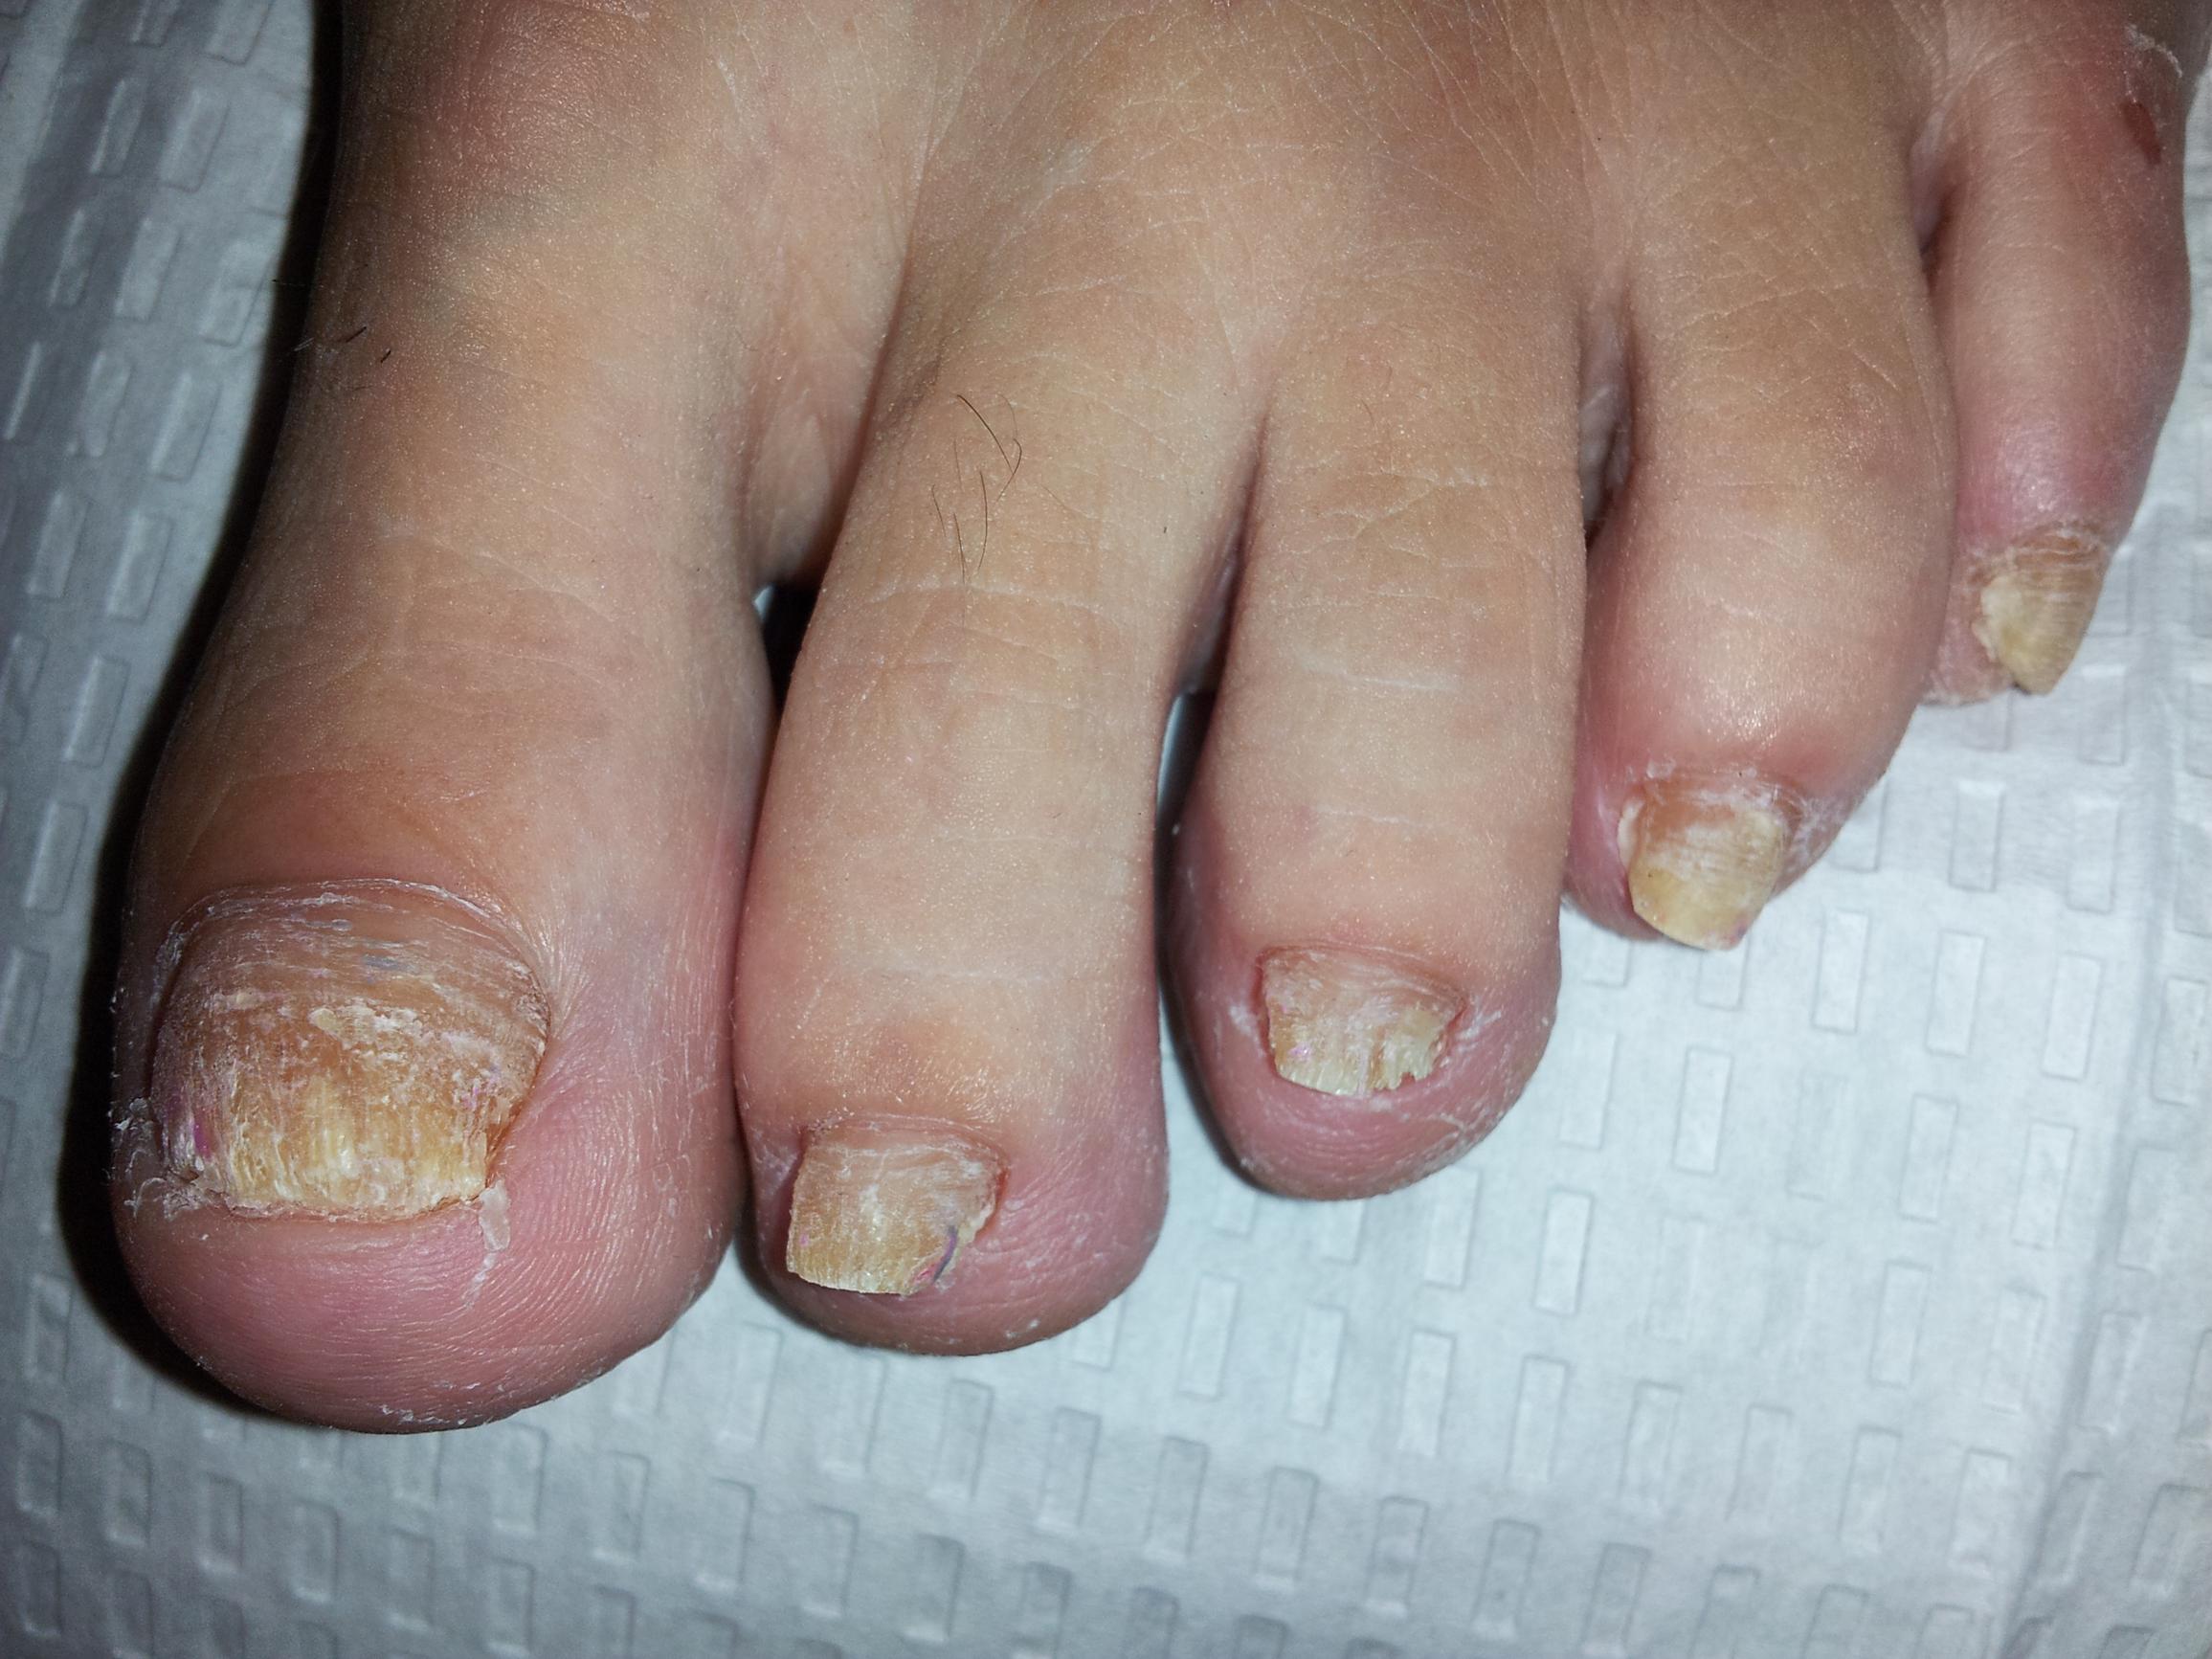 How will my fungal nails be treated